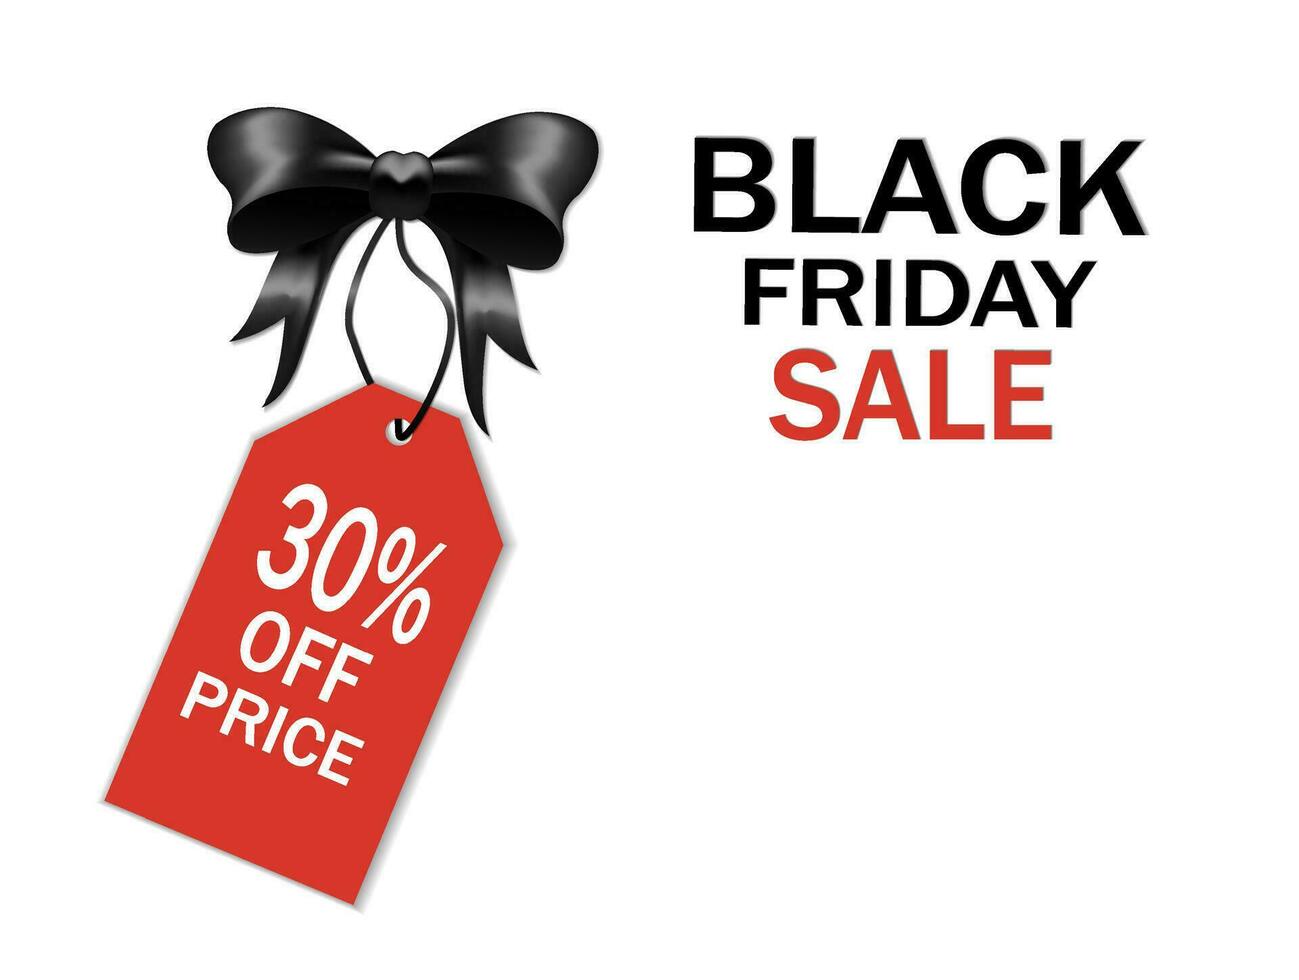 Decorative black bow with ribbons and price tag isolated on white for black friday sale design. Vector illustration